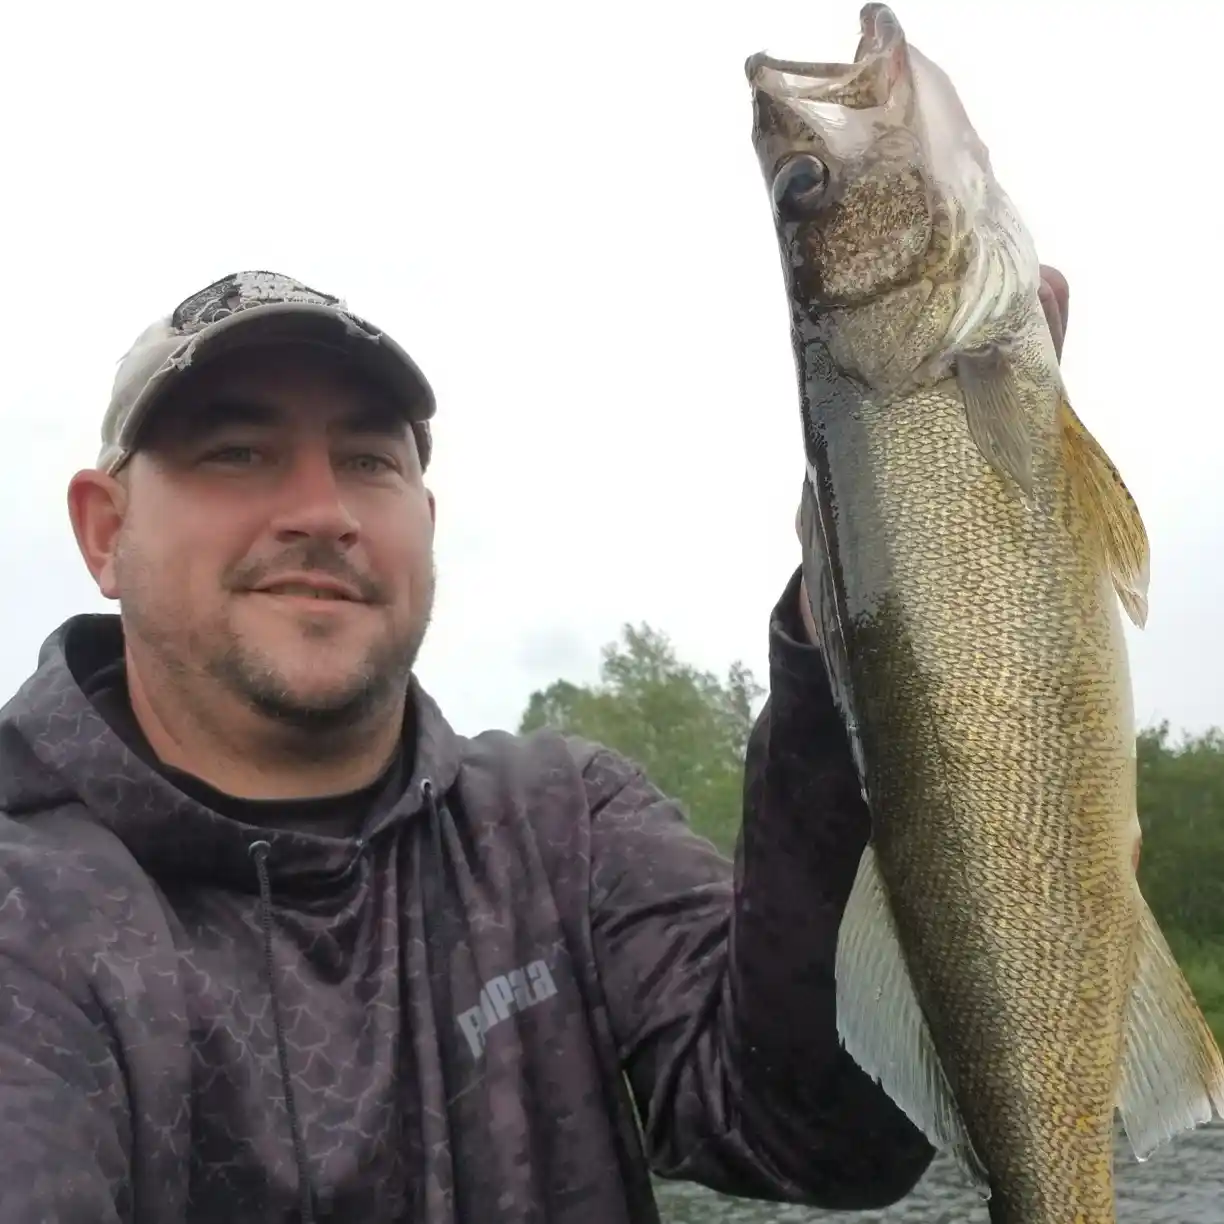 Freshwater sport fishing in Montreal, Quebec and Ontario.